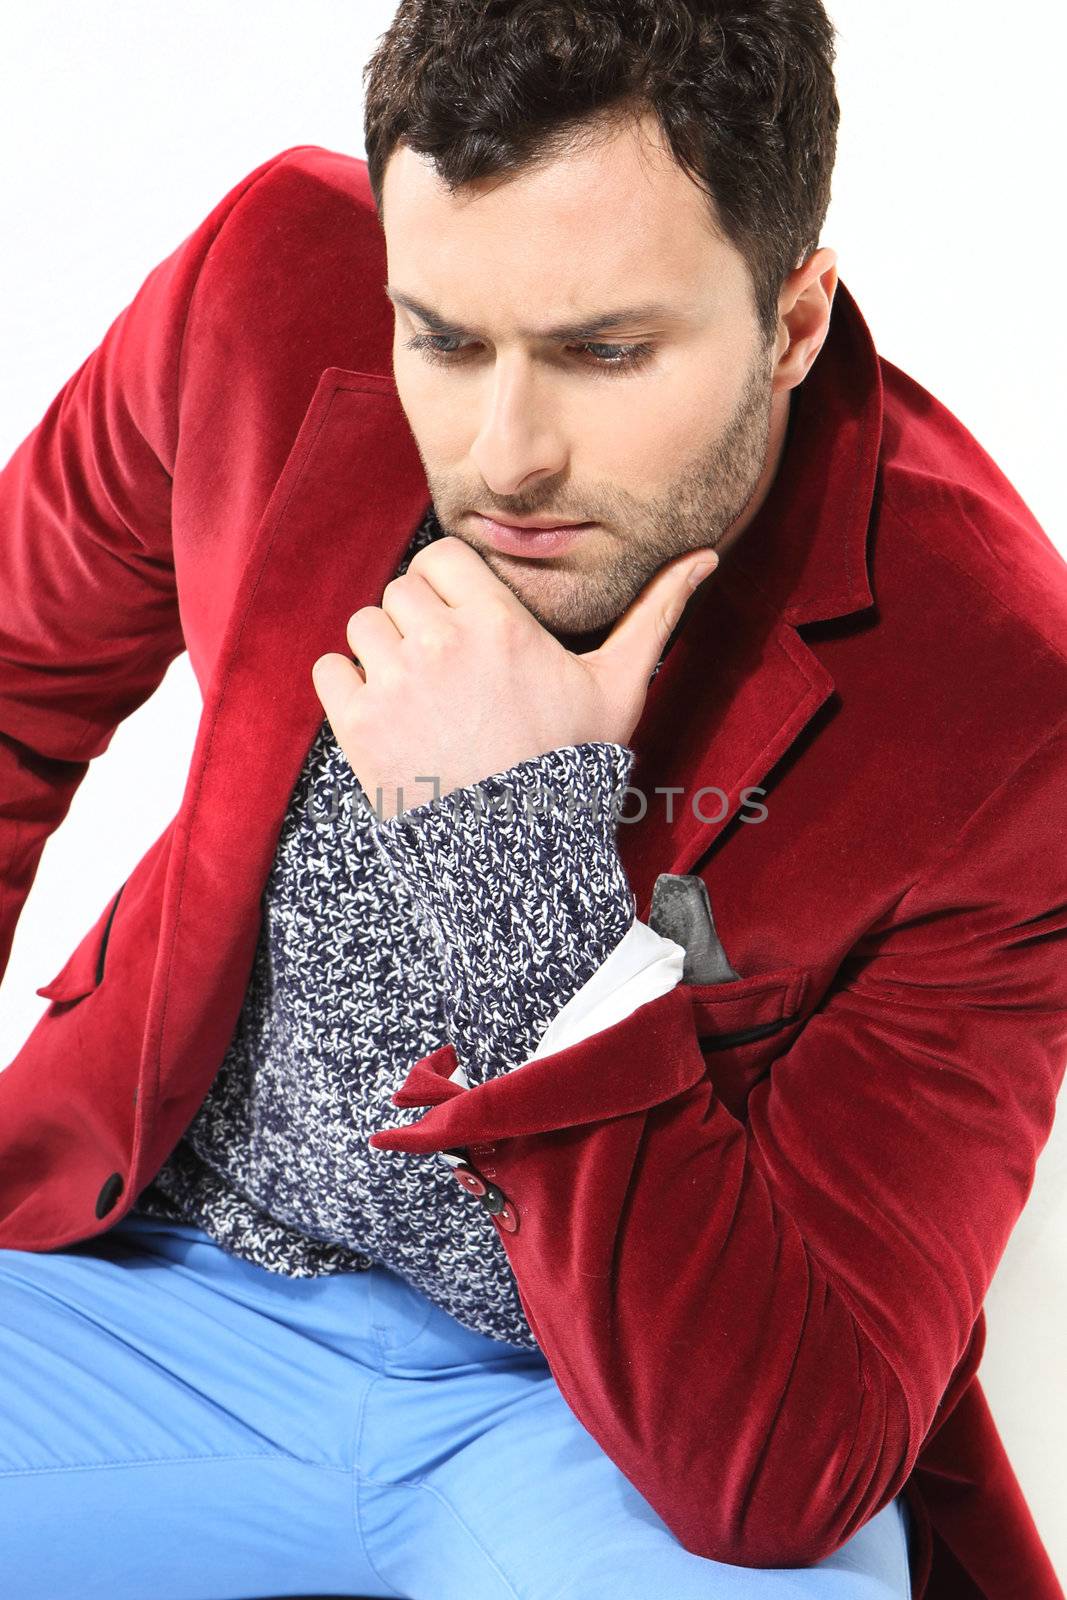 Handsome man posing in a red jacket